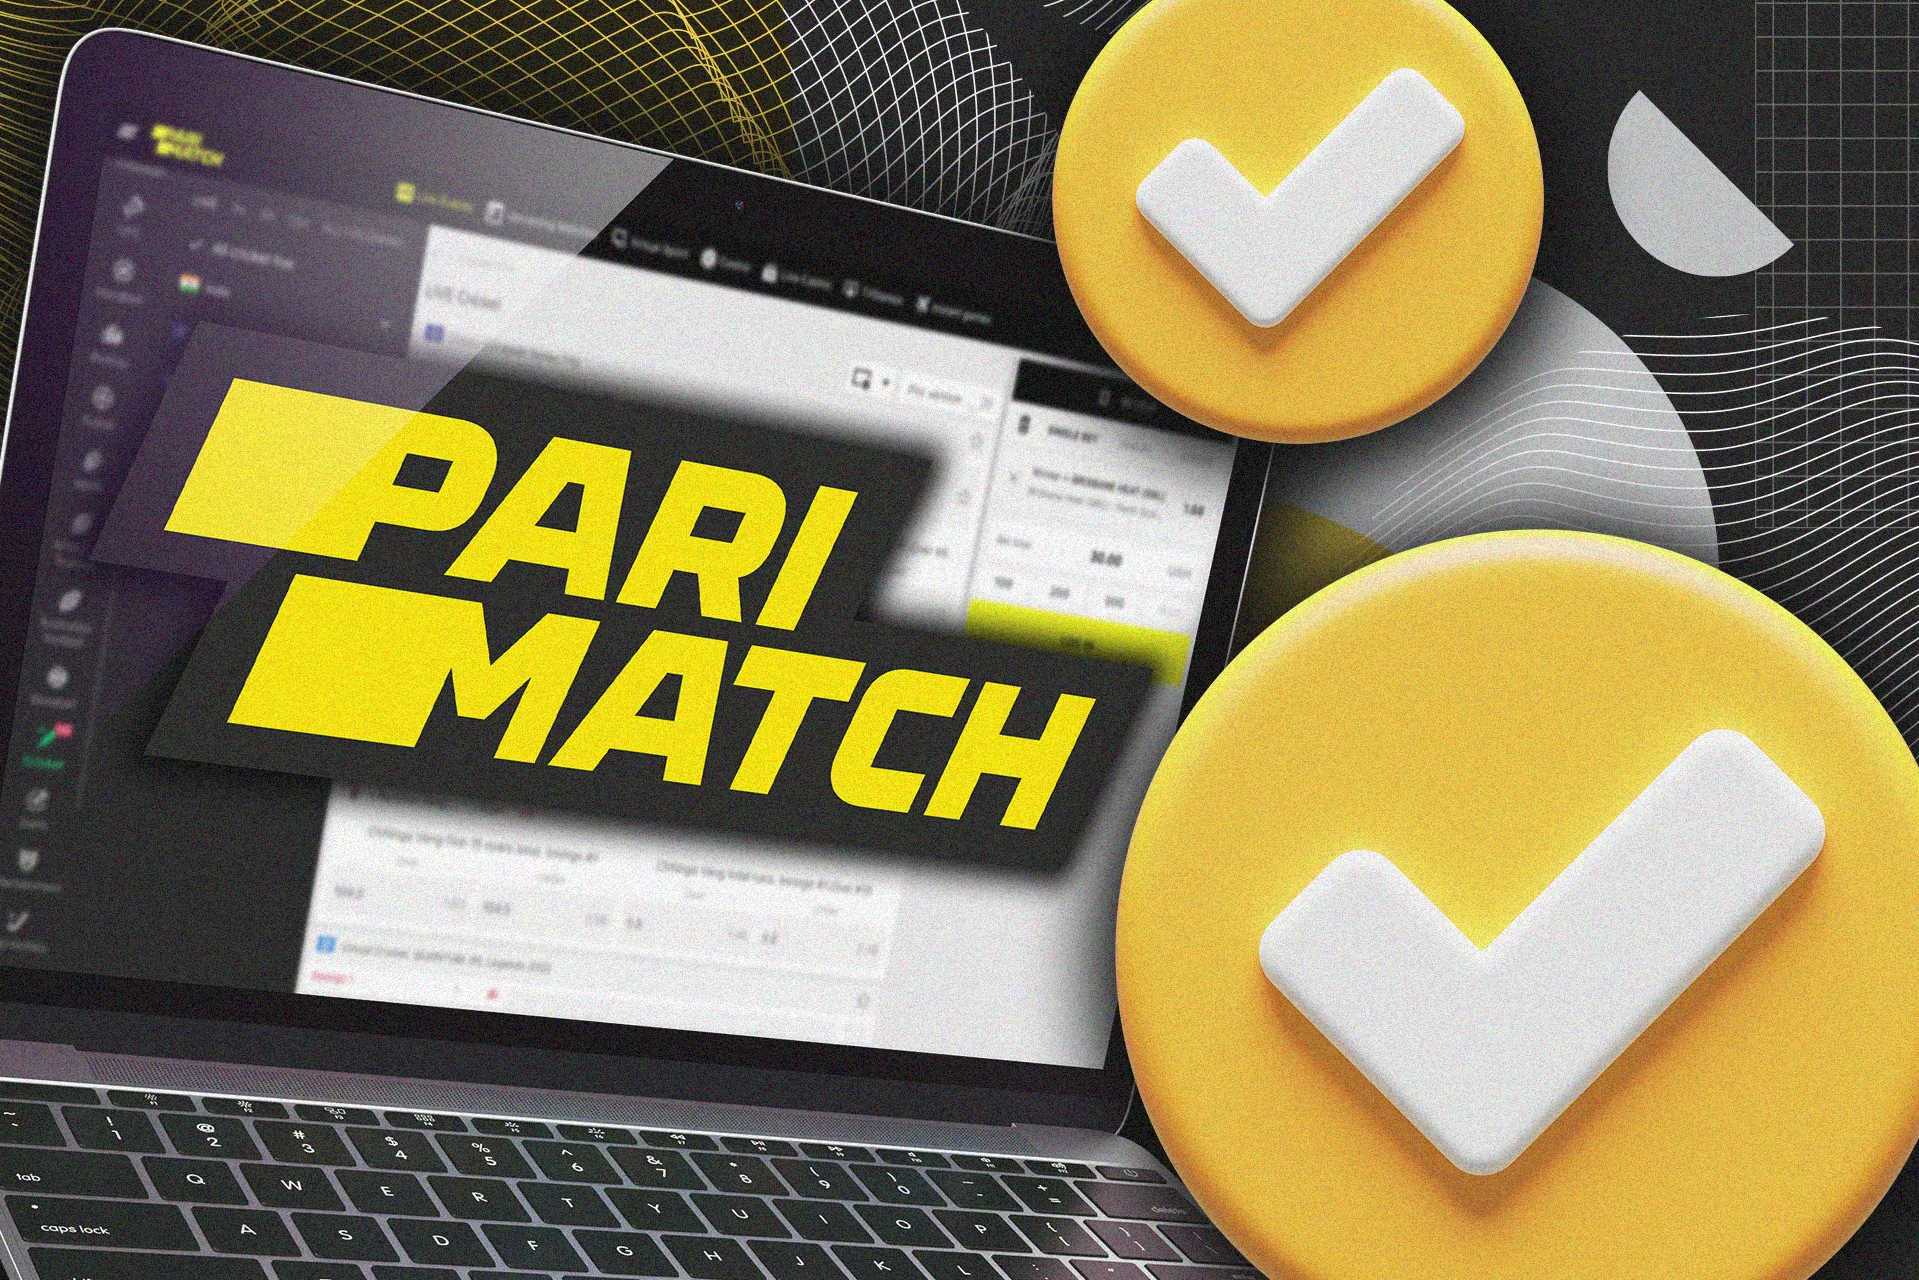 Parimatch offers many benefits for comfortable betting.